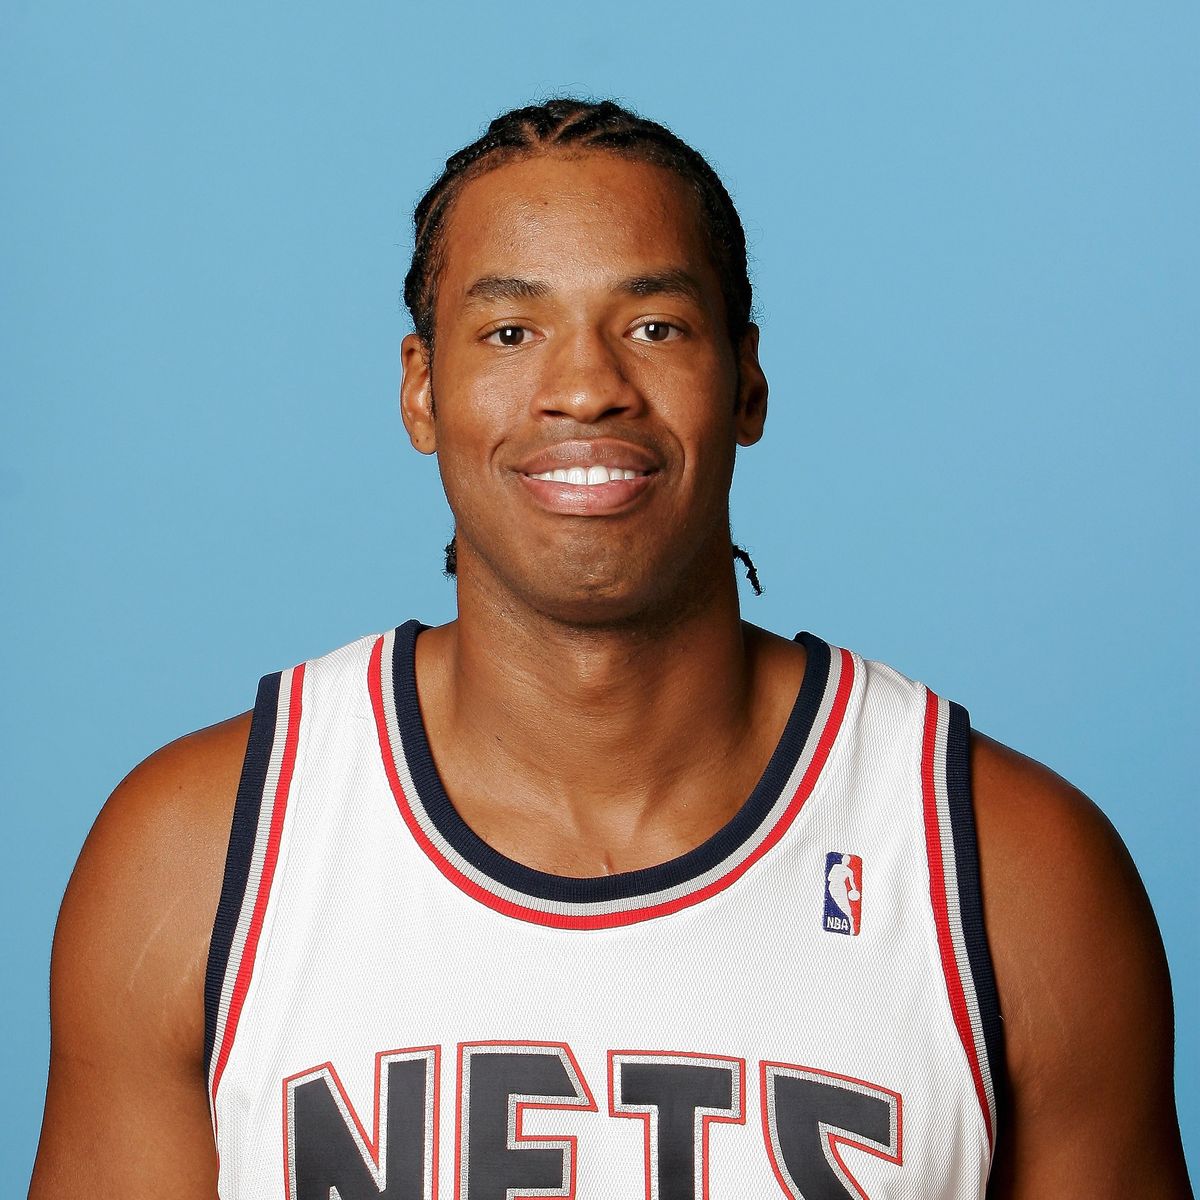 EAST RUTHERFORD, NJ - OCTOBER 1: Jason Collins #35 of the New Jersey Nets poses for a portrait during NBA Media Day at the Nets Practice Facility on October 1, 2007 in East Rutherford, New Jersey. NOTE TO USER: User expressly acknowledges and agrees that, by downloading and/or using this Photograph, user is consenting to the terms and conditions of the Getty Images License Agreement. Mandatory Copyright Notice: Copyright 2007 NBAE (Photo by Ed Jimenez/NBAE via Getty Images)